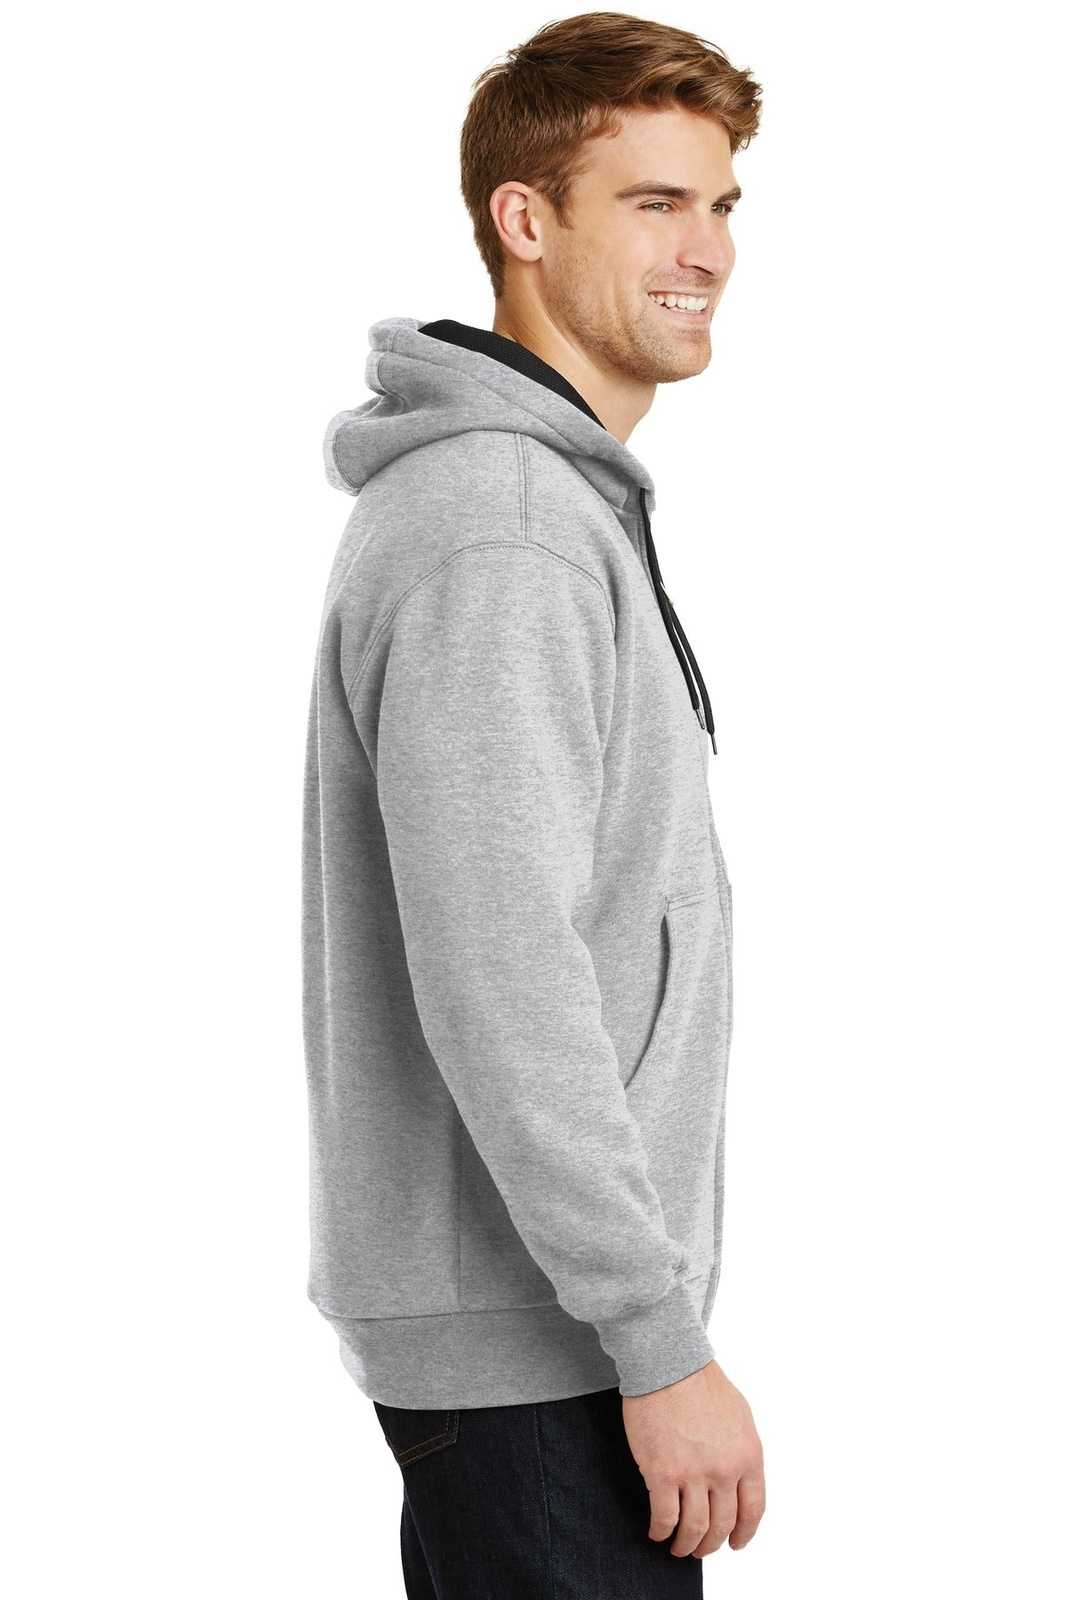 CornerStone CS620 Heavyweight Full-Zip Hooded Sweatshirt with Thermal Lining - Athletic Heather - HIT a Double - 3